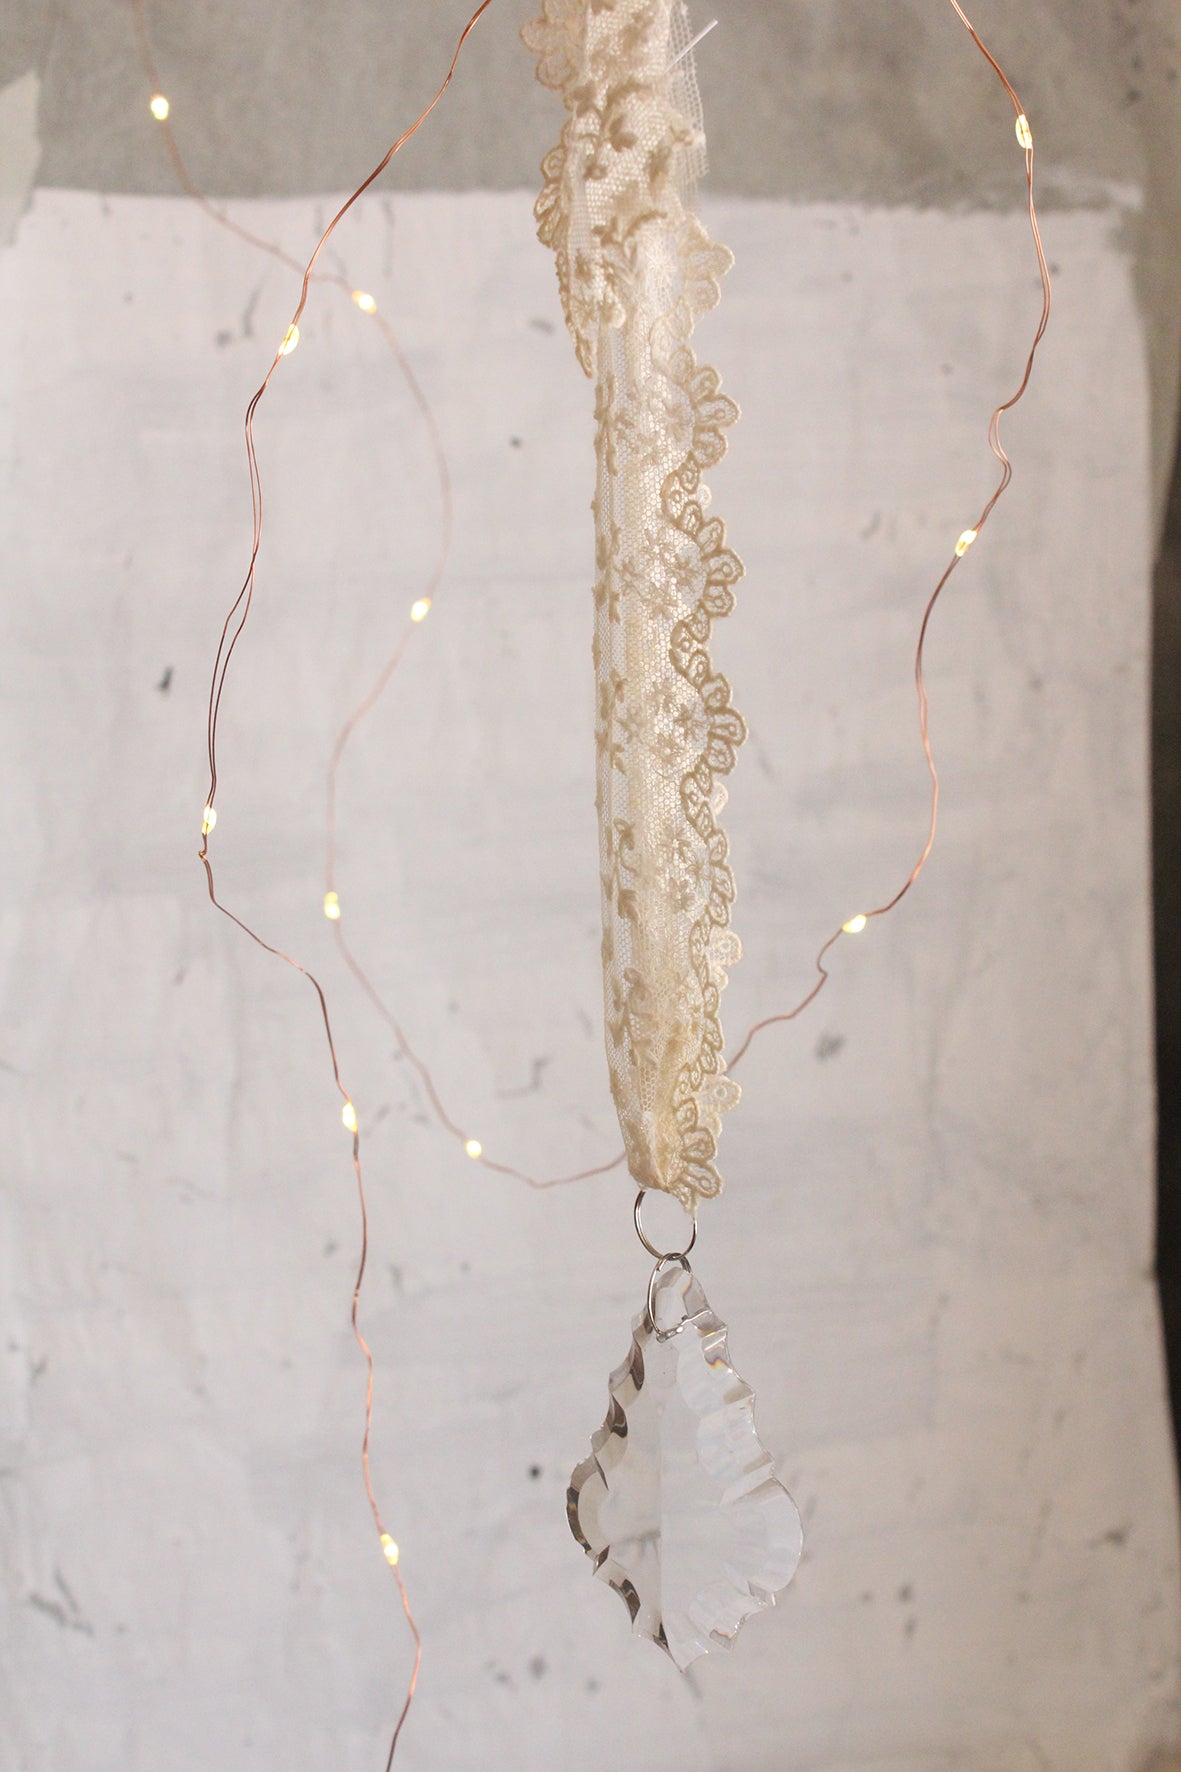 Antique French Glass Chandelier Drop With An Antique Lace Hanger